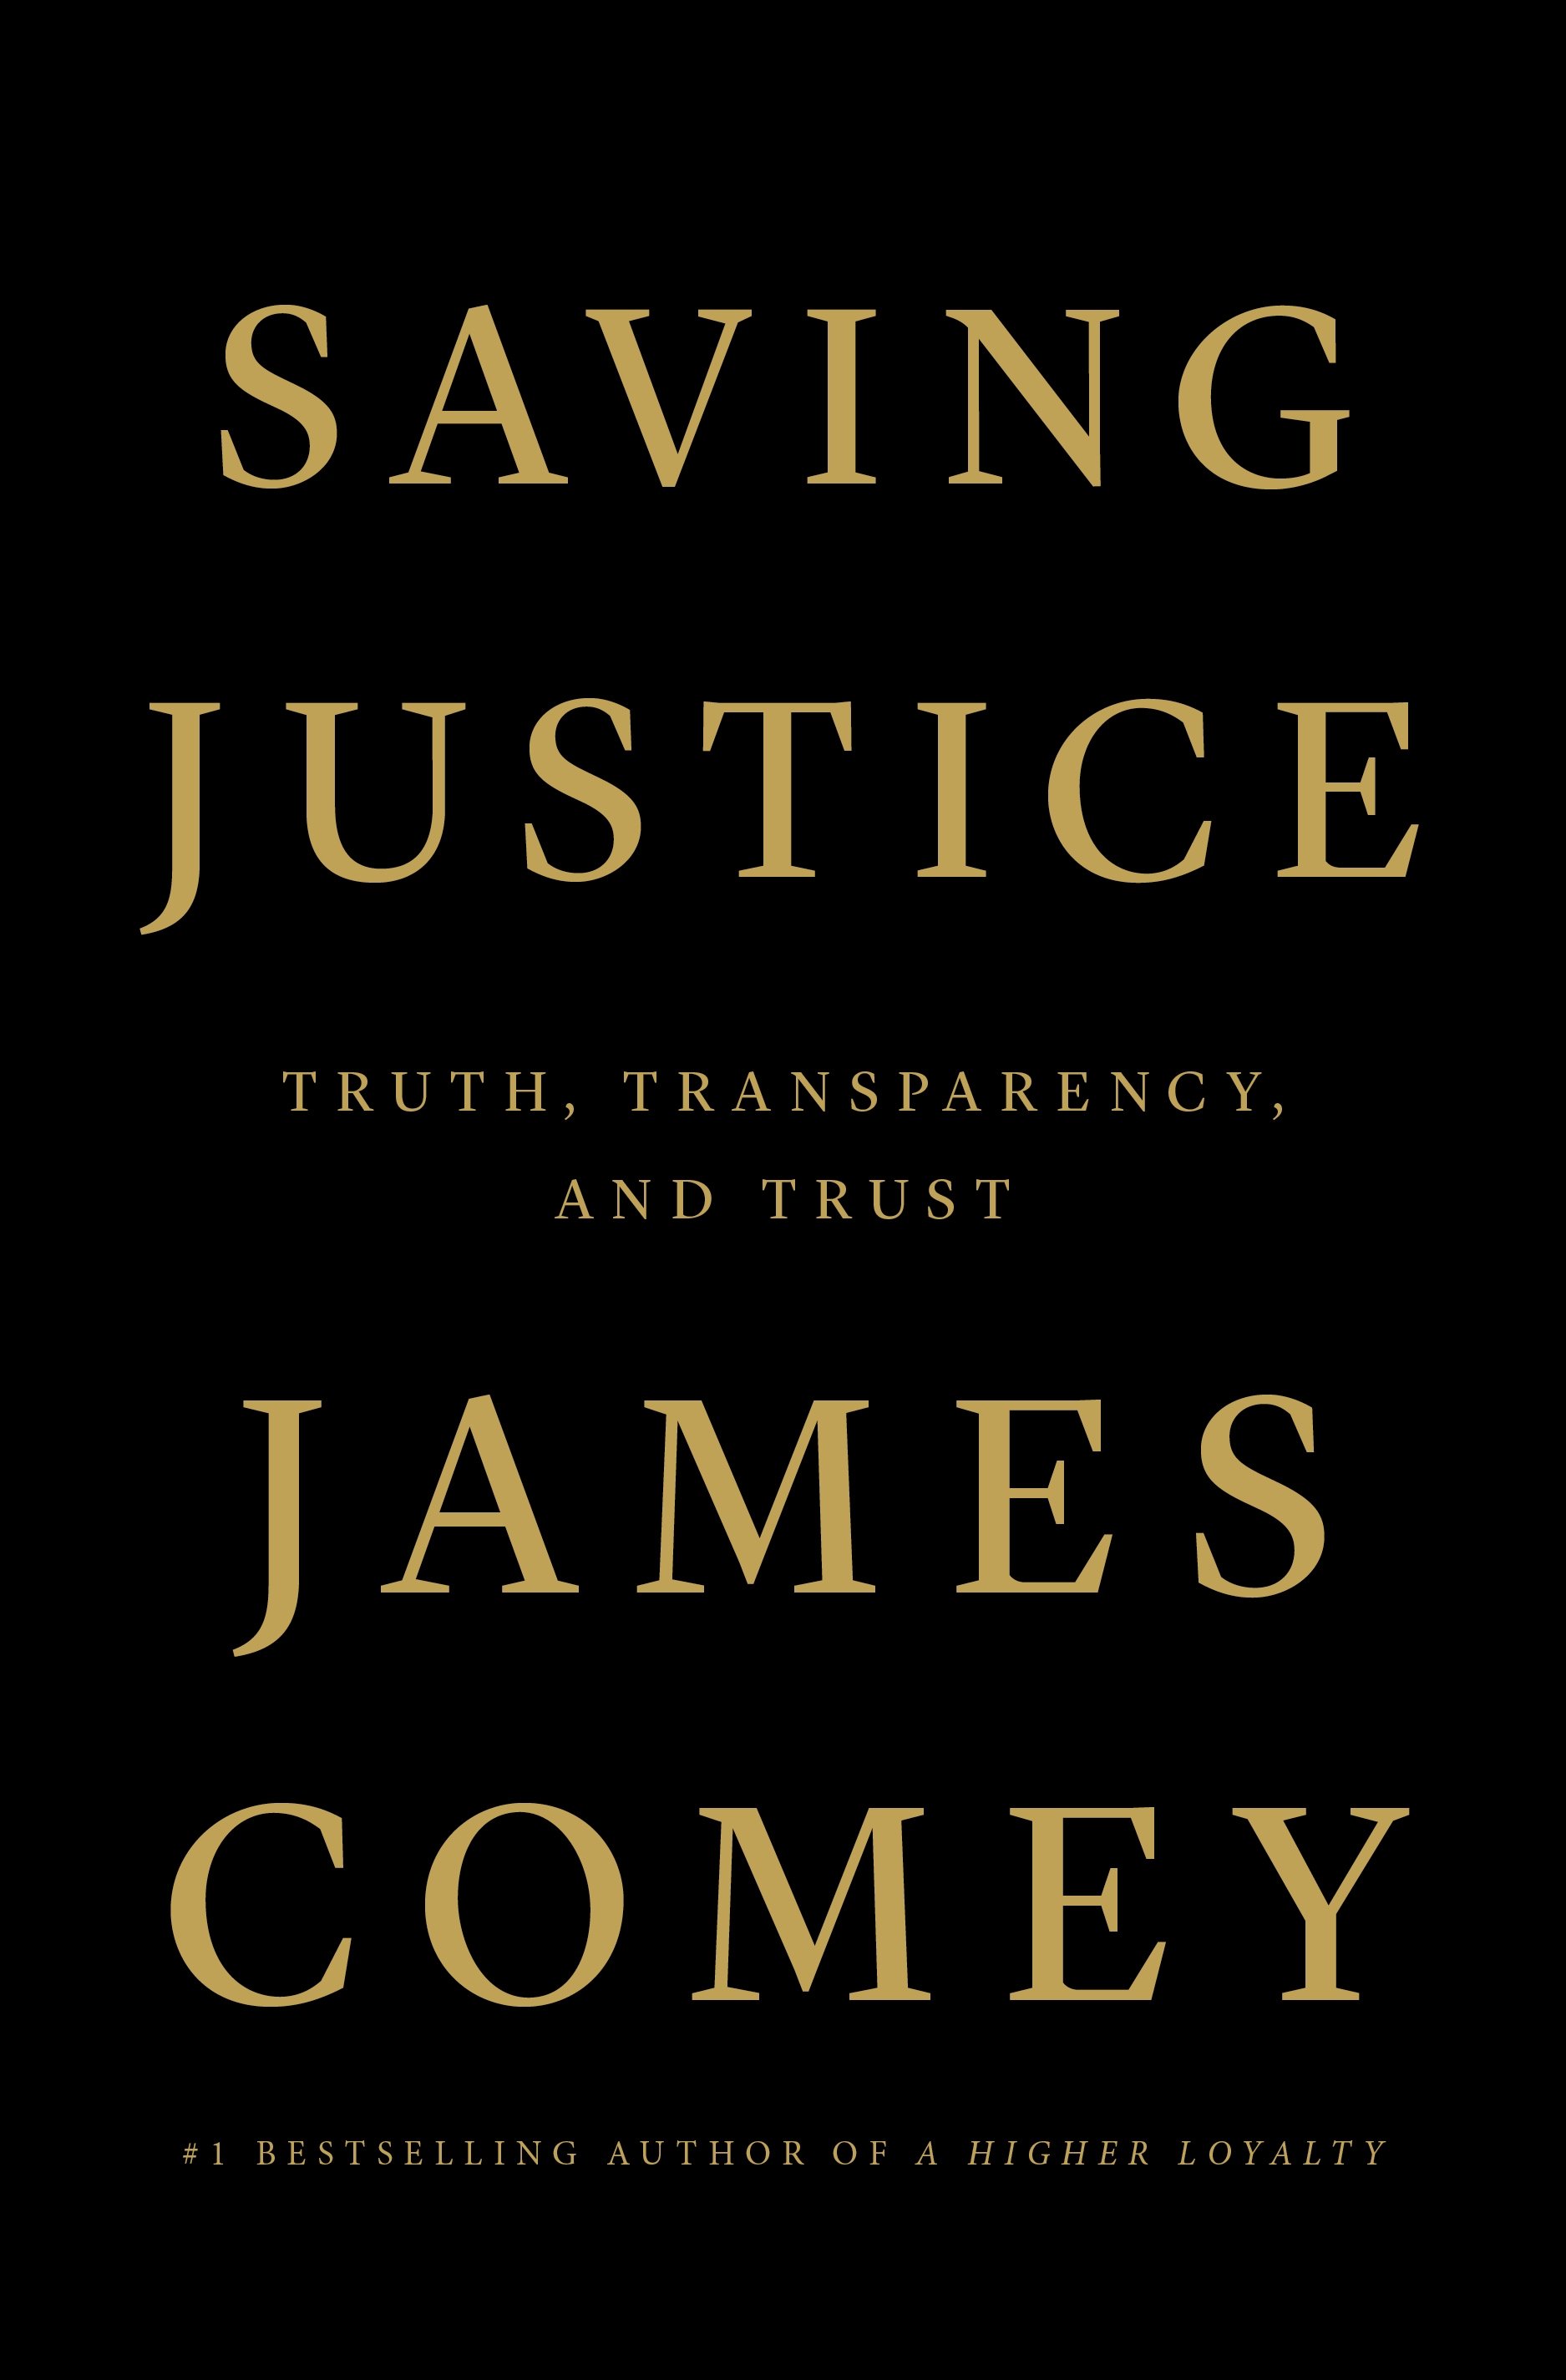 Book “Saving Justice” by James Comey — January 12, 2021